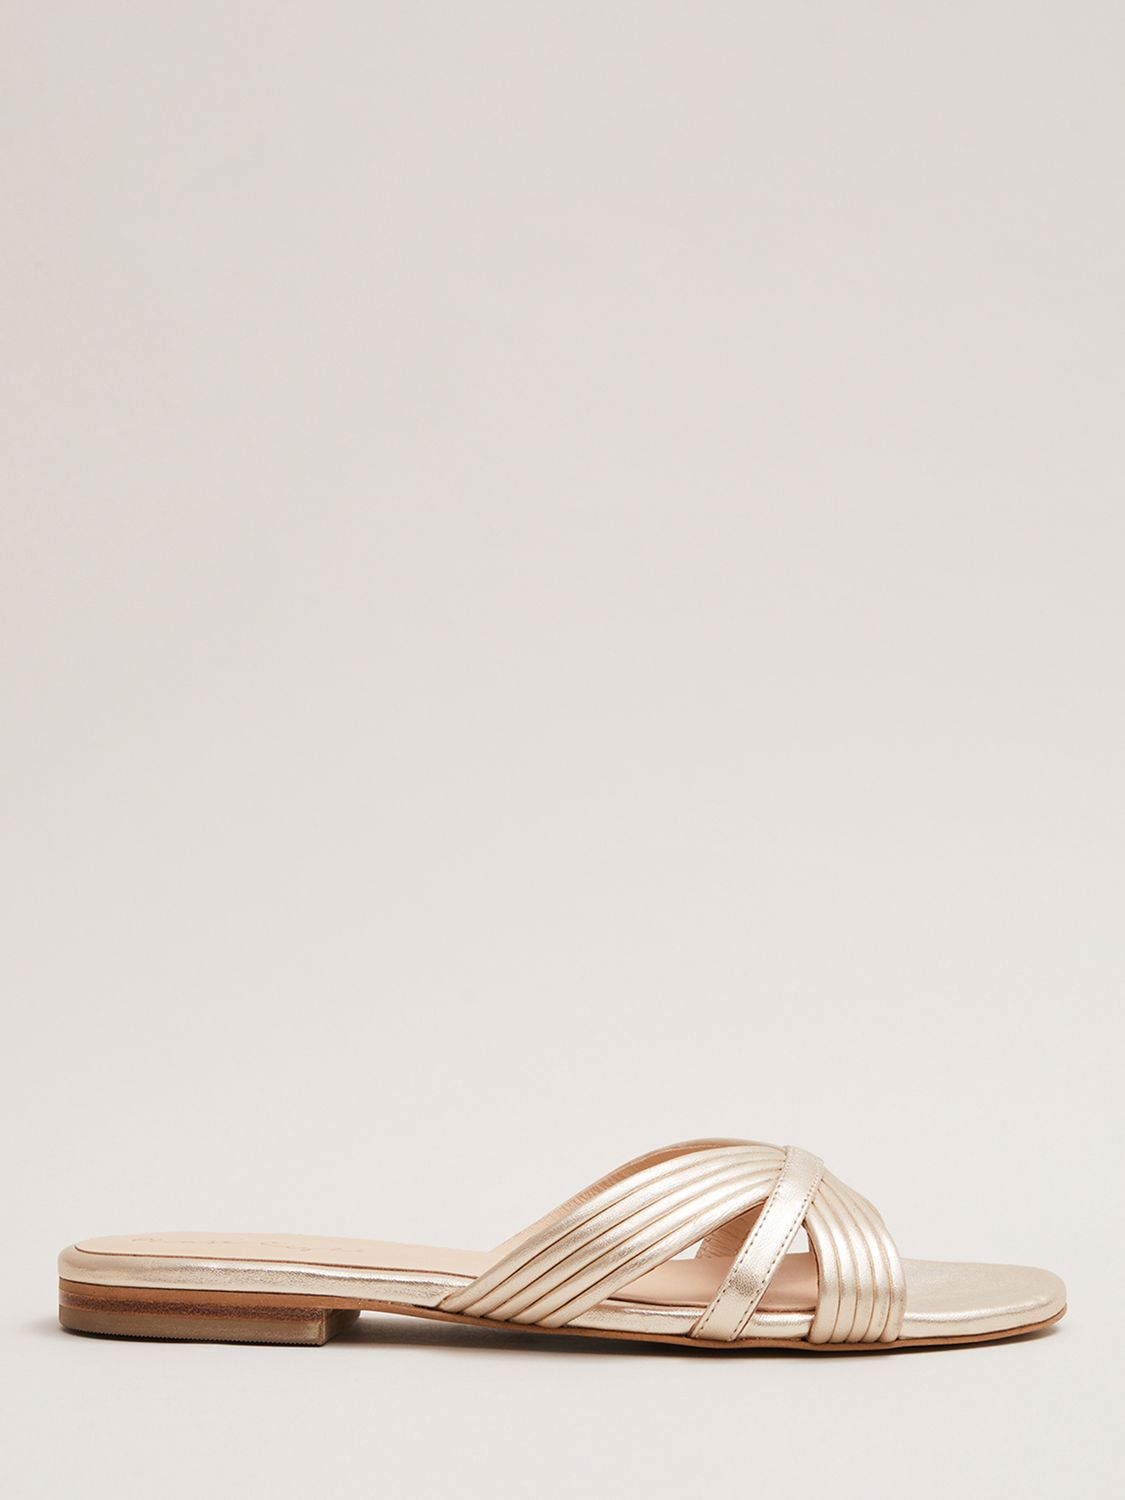 Phase Eight Leather Slip On Sandals, Gold, EU39